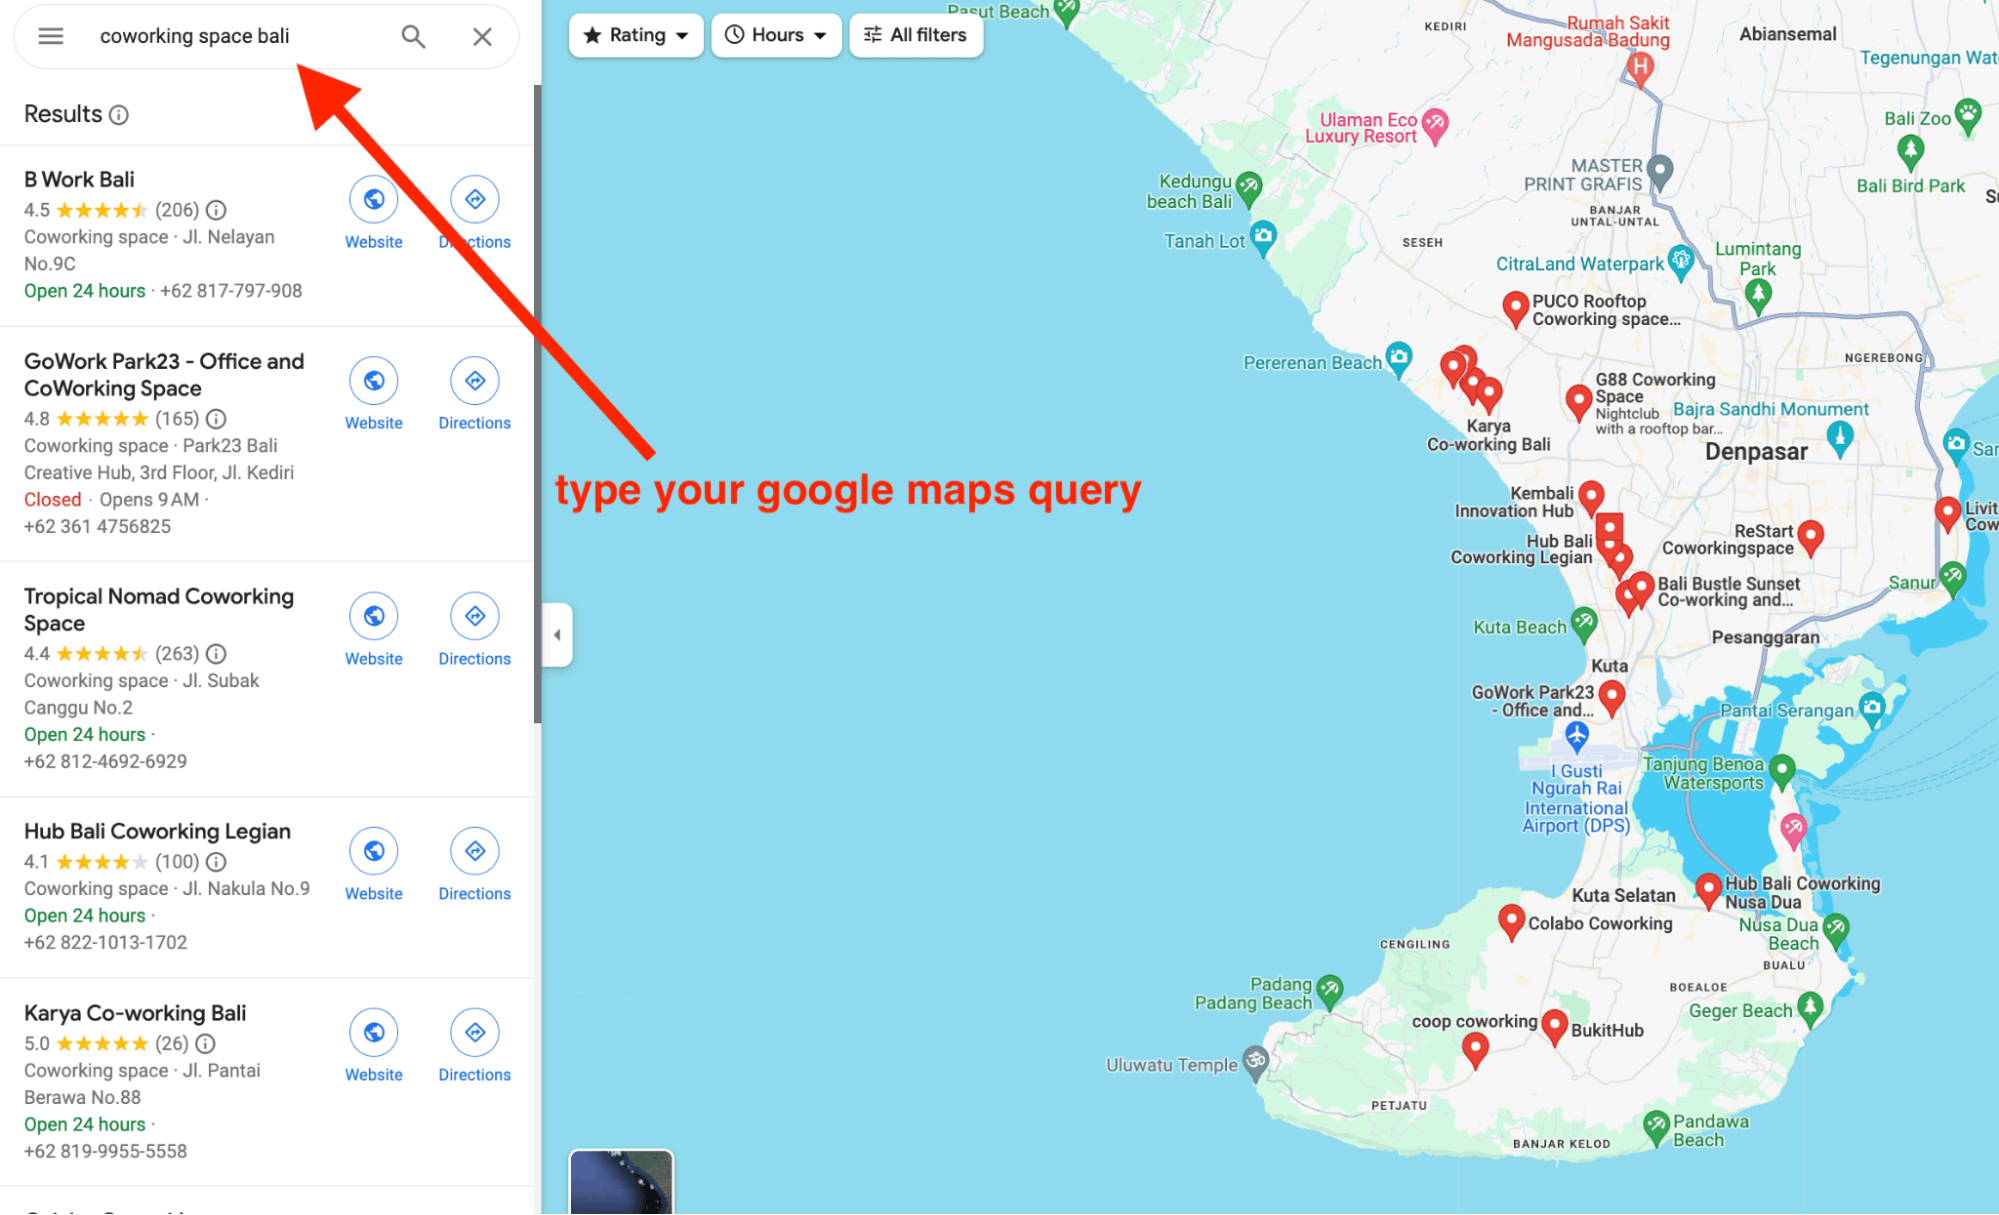 type query in google maps - image21.png